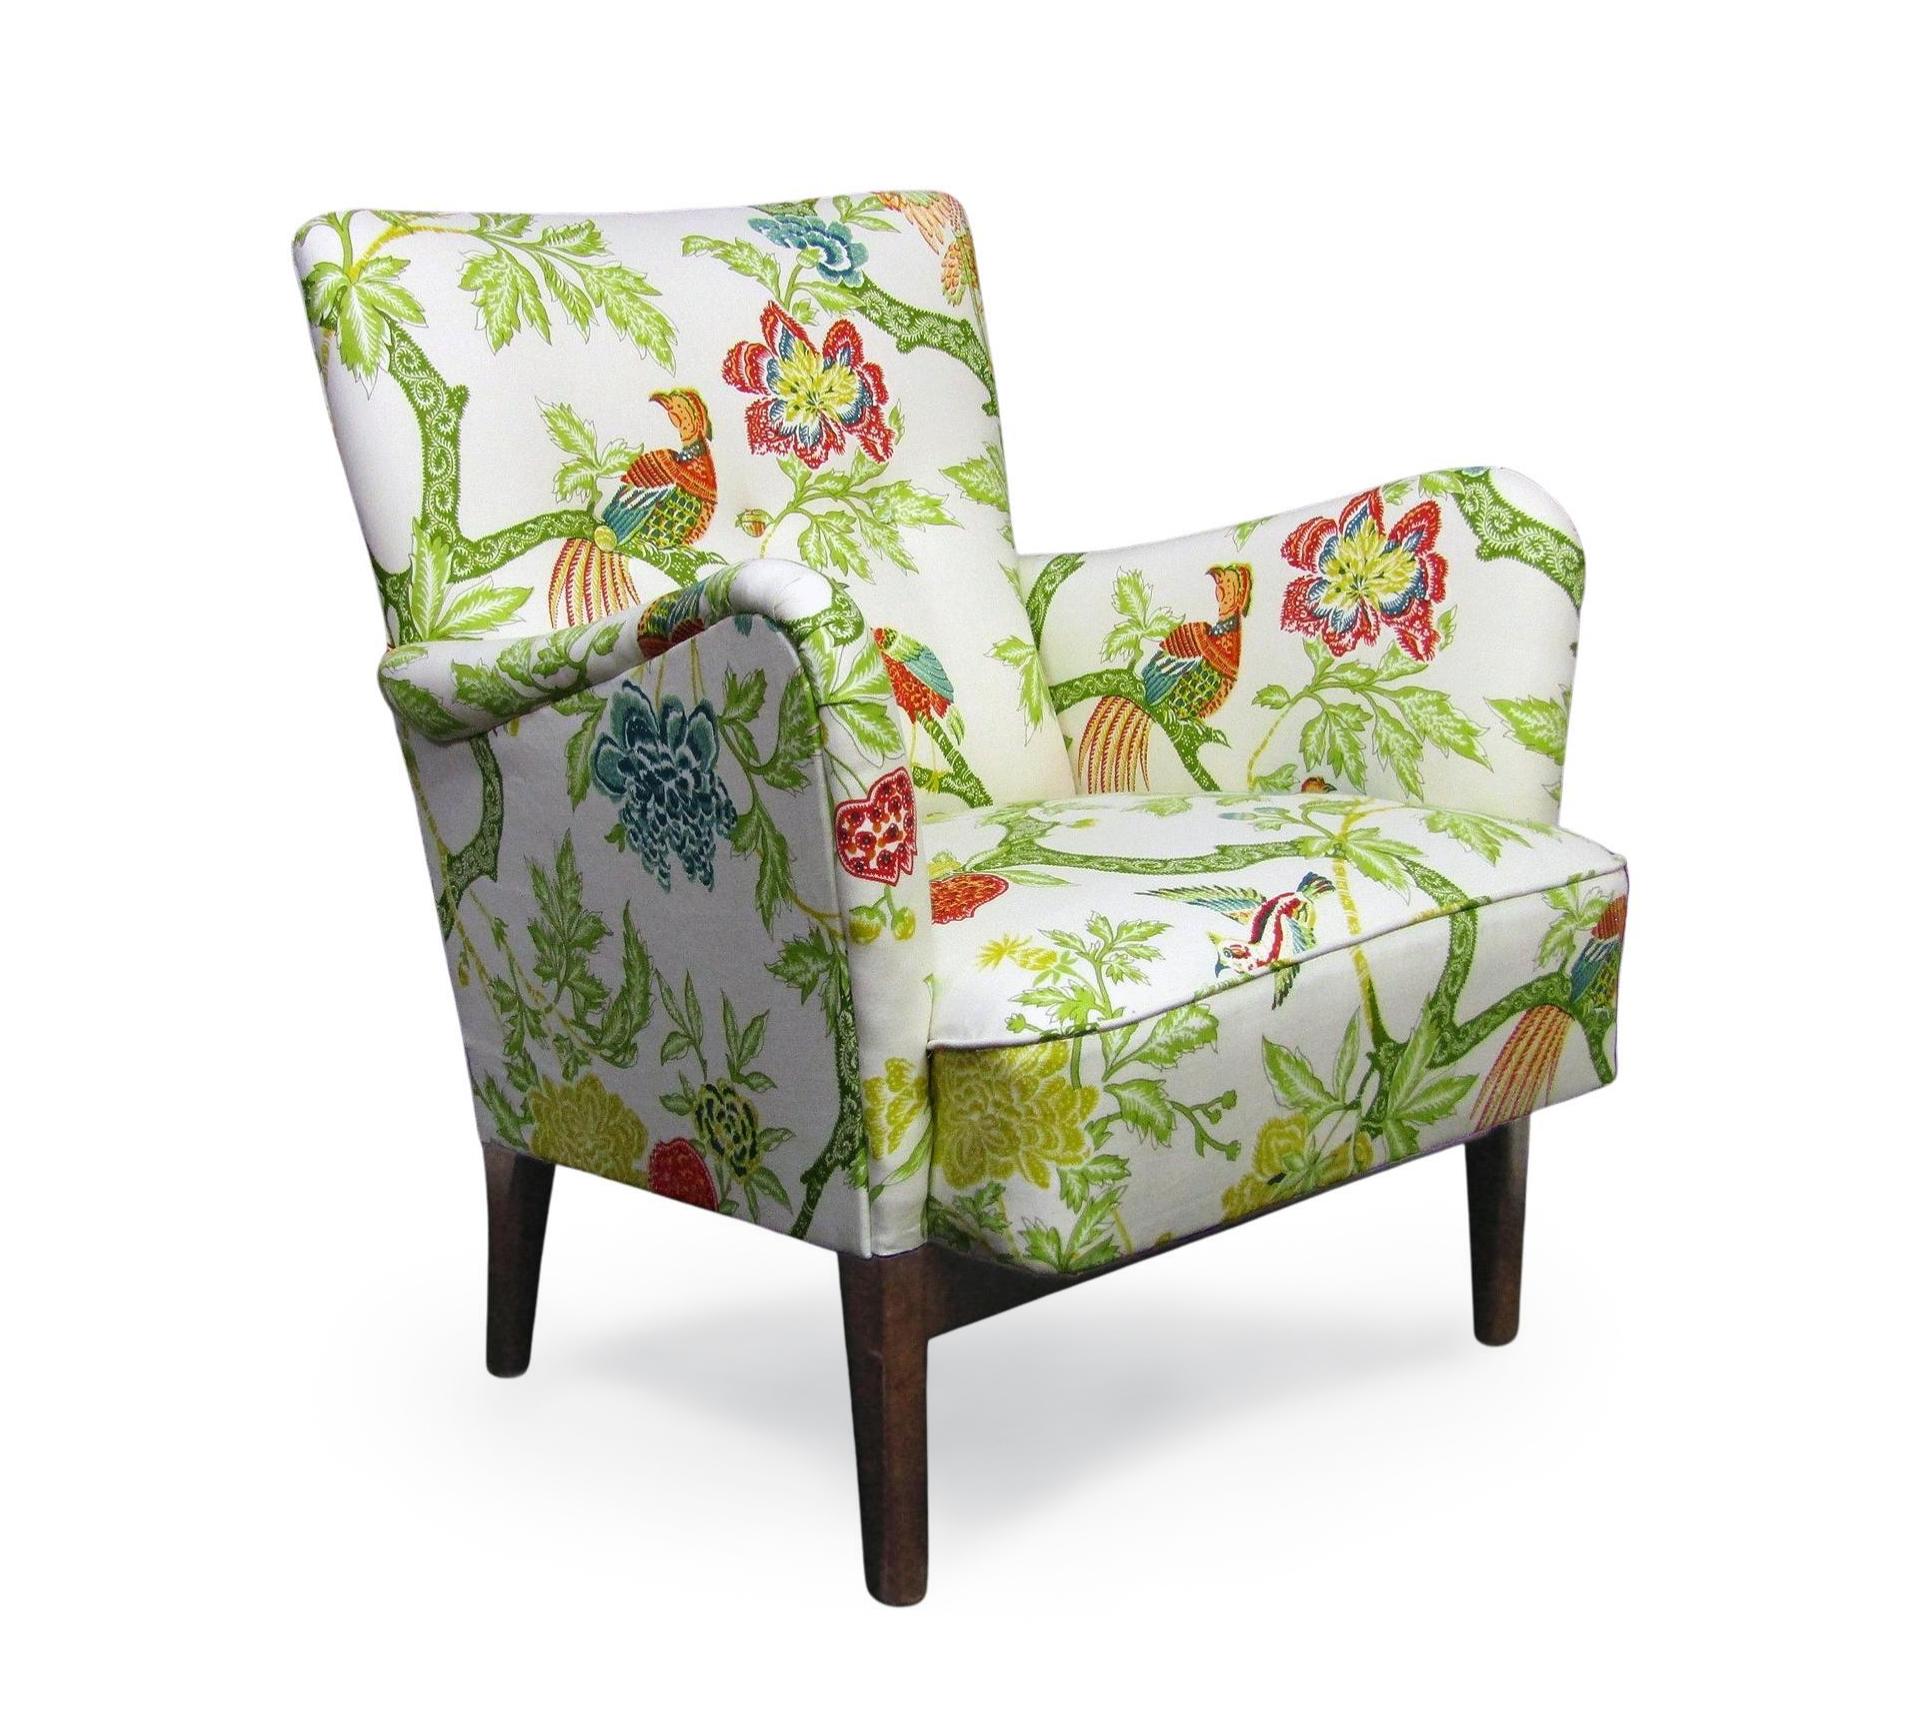 A 1940s Danish lounge chair by Orla Molgaard-Nielsen for Fritz Hansen.

This elegant vintage lounge chair has been newly reupholstered in stunning Arbre Chinois fabric by Schumacher. Adorned with birds of paradise, it is very similar in style to